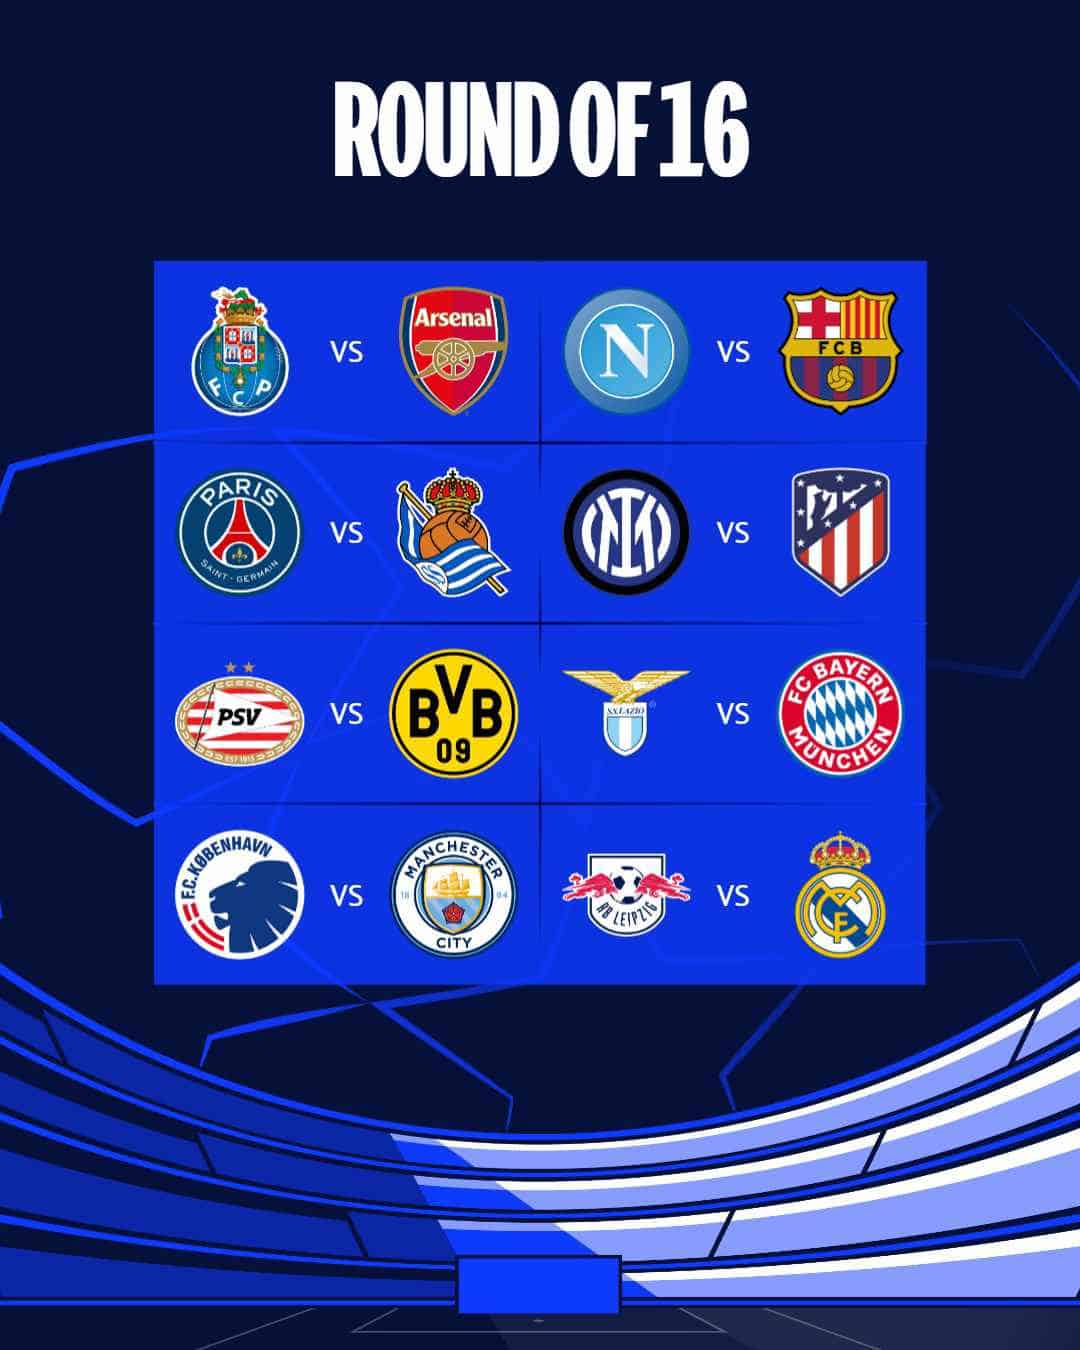 Winners And Losers From The 2023/24 UEFA Champions League Round of 16 Draw